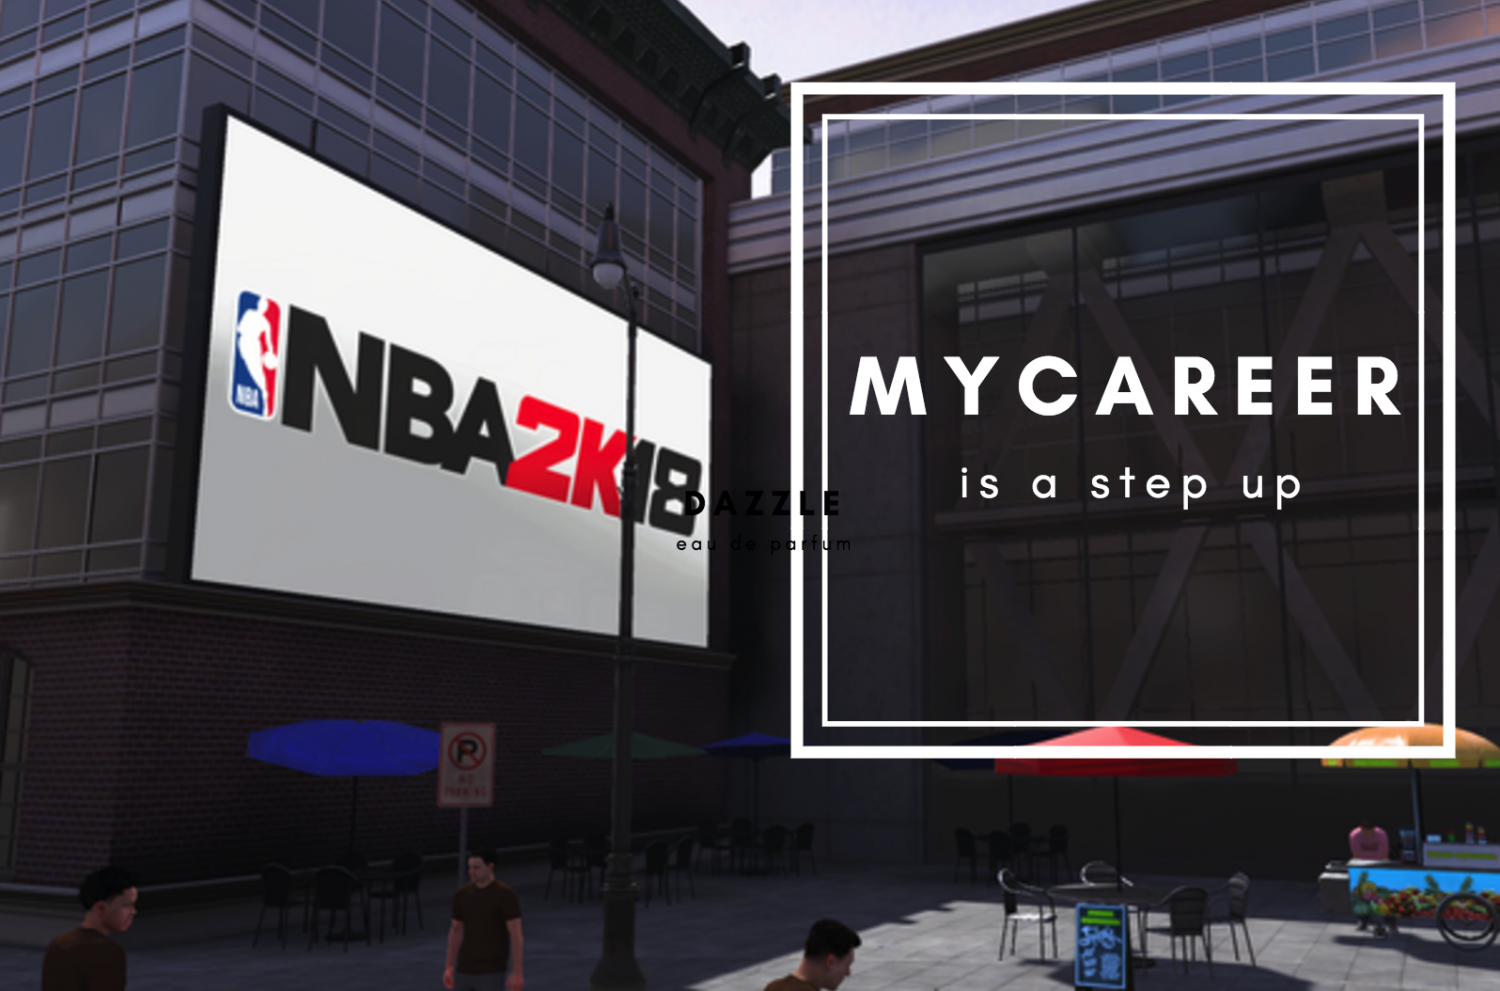 NBA 2K18s MyCareer is a step up from previous years